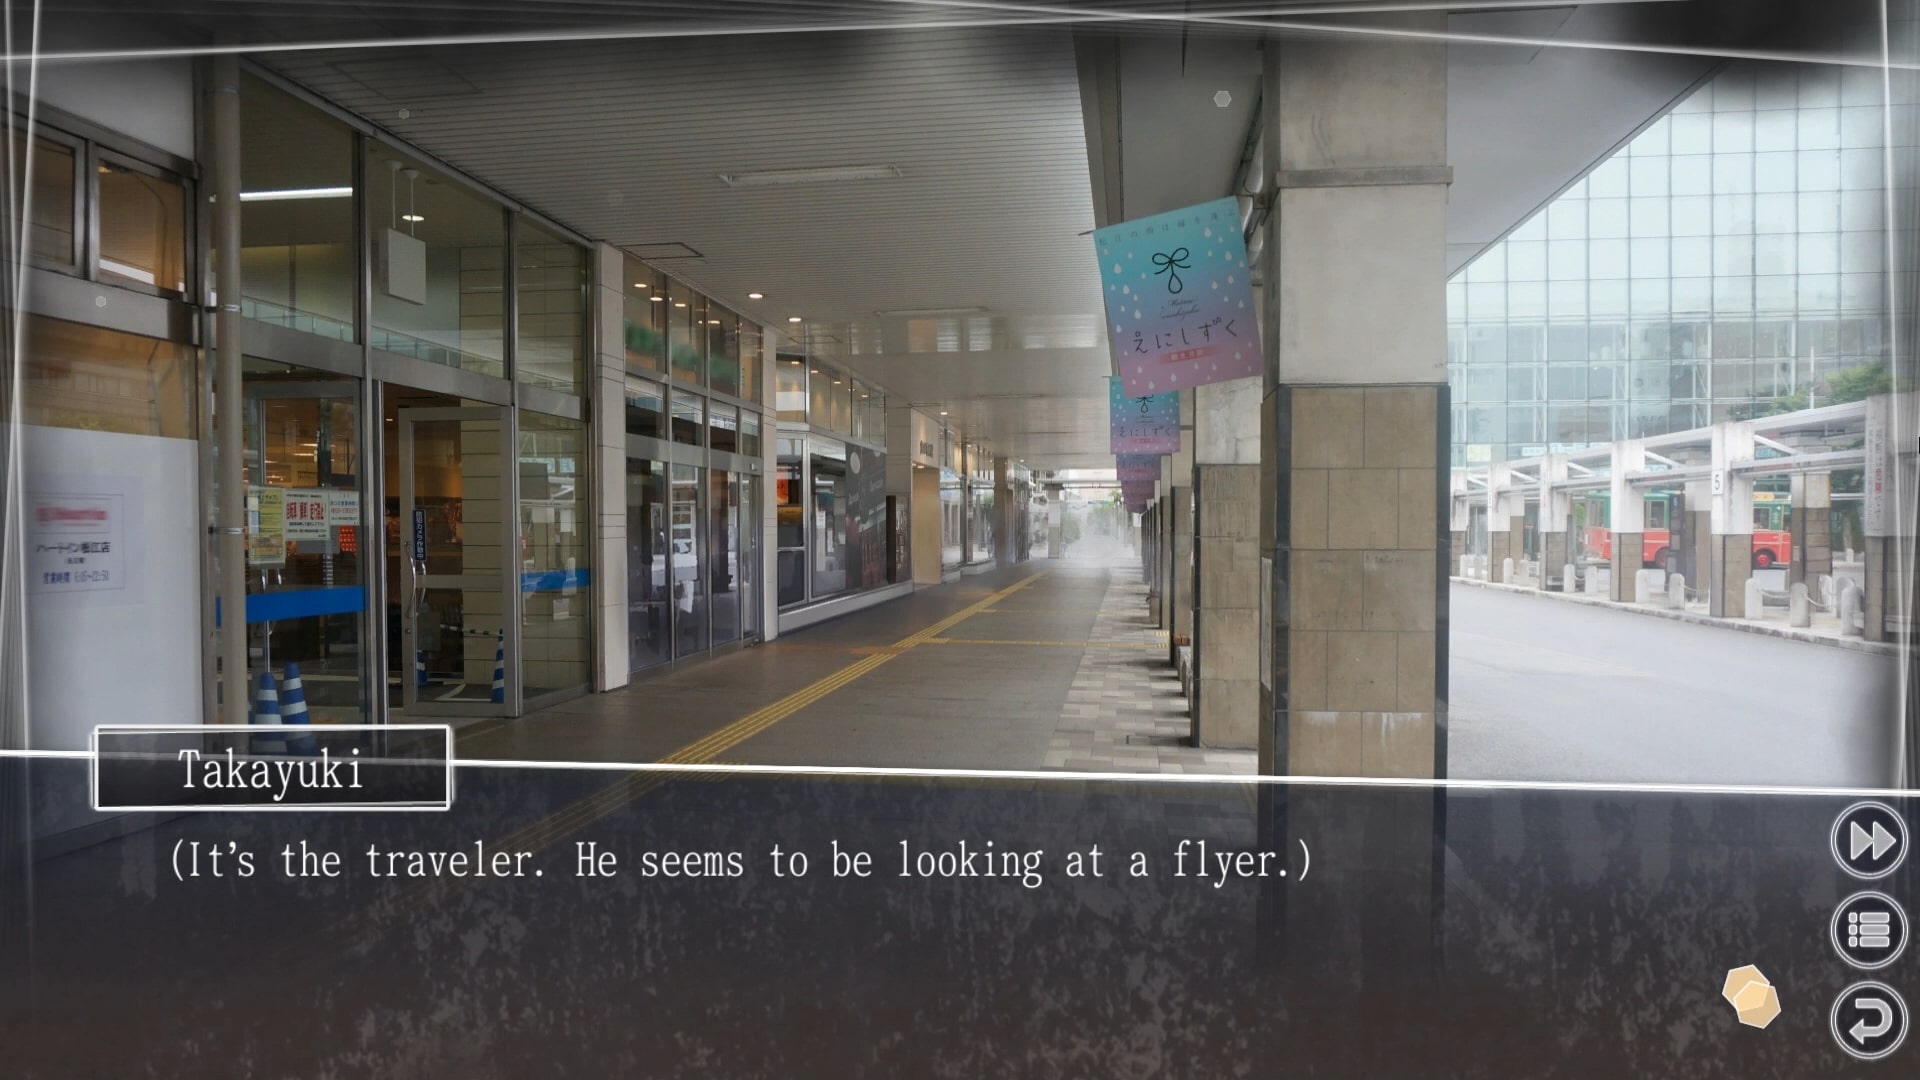 Root Letter Last Answer Additional Scenarios for Root Letter Last Answer Walkthrough - Scenario 1: Wandering Traveler - 2A7A91B